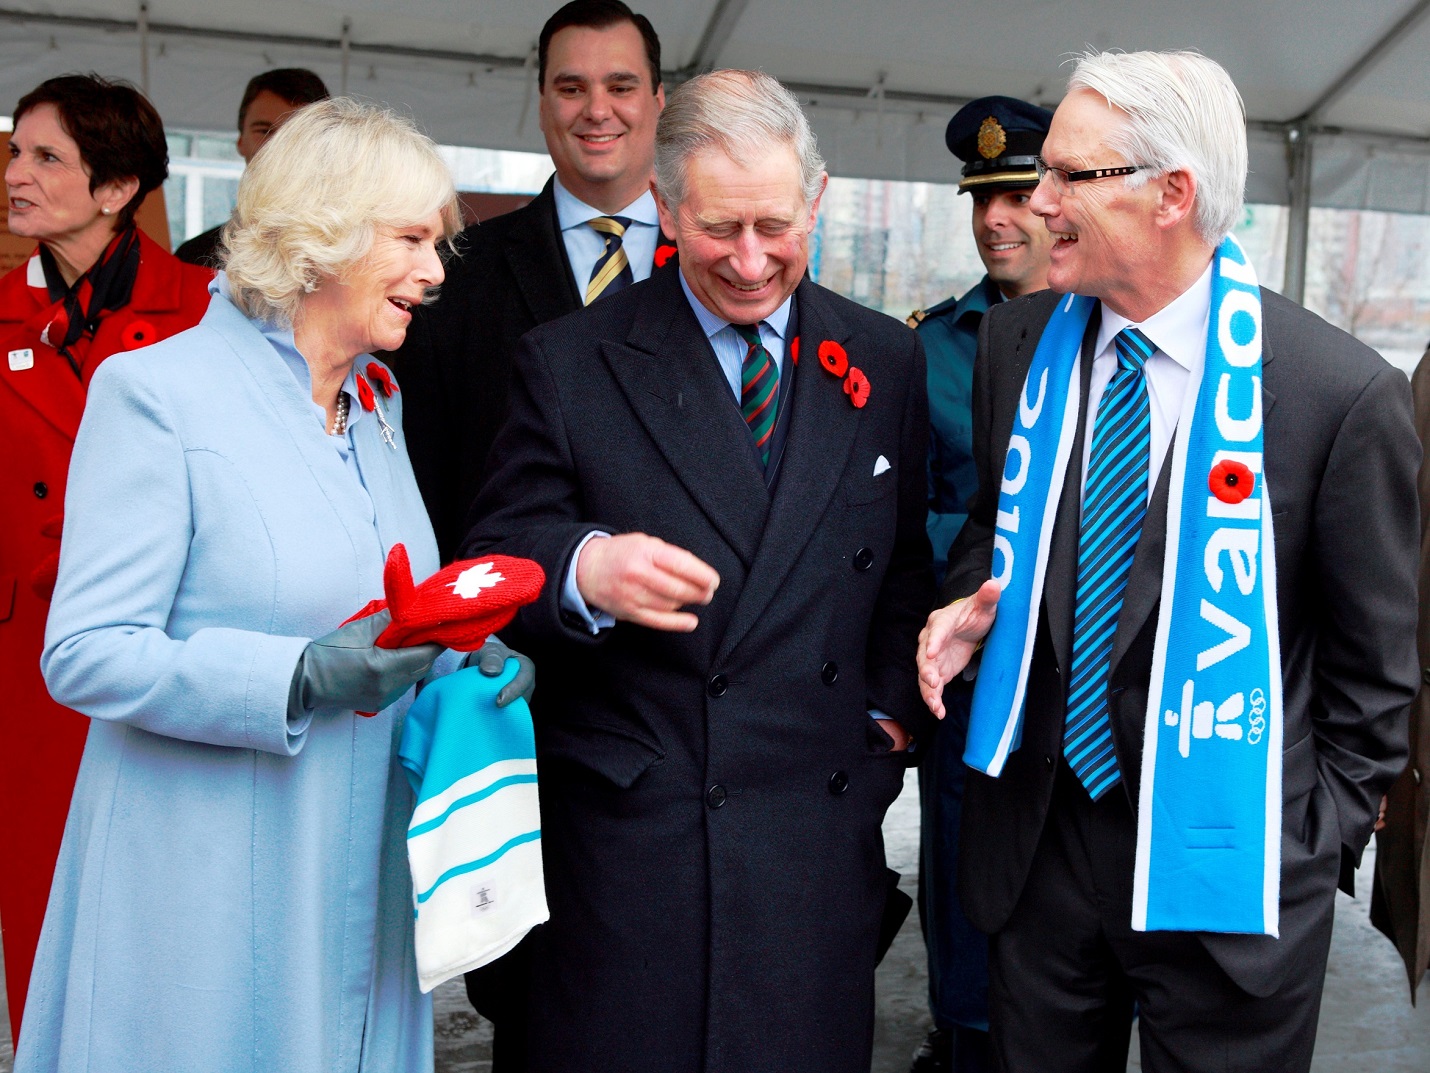 Presentation of Vancouver Olympics souvenir mitts and scarves by Premier Gordon Campbell